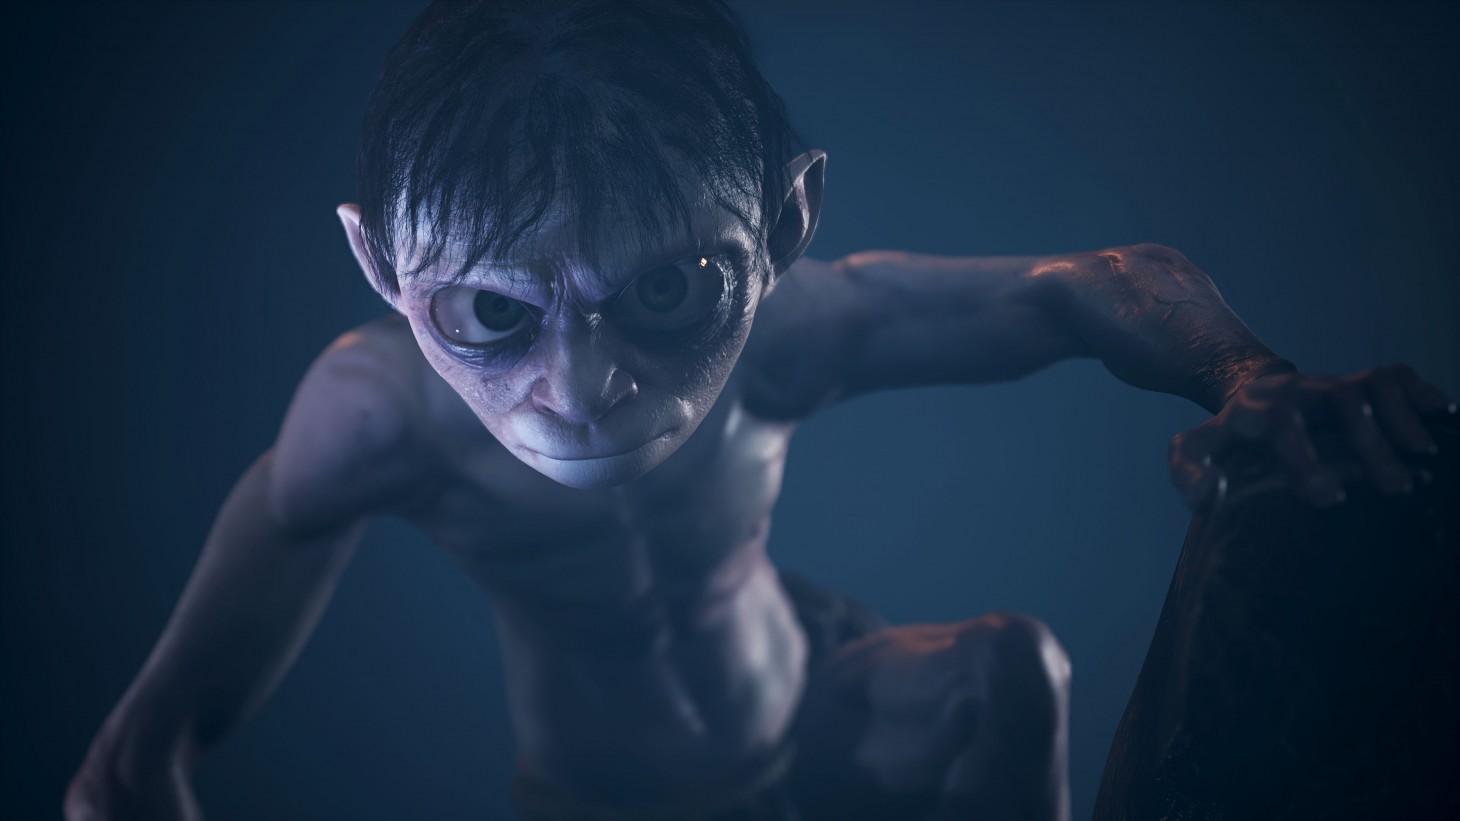 The Lord of the Rings: Gollum game has been slammed by critics